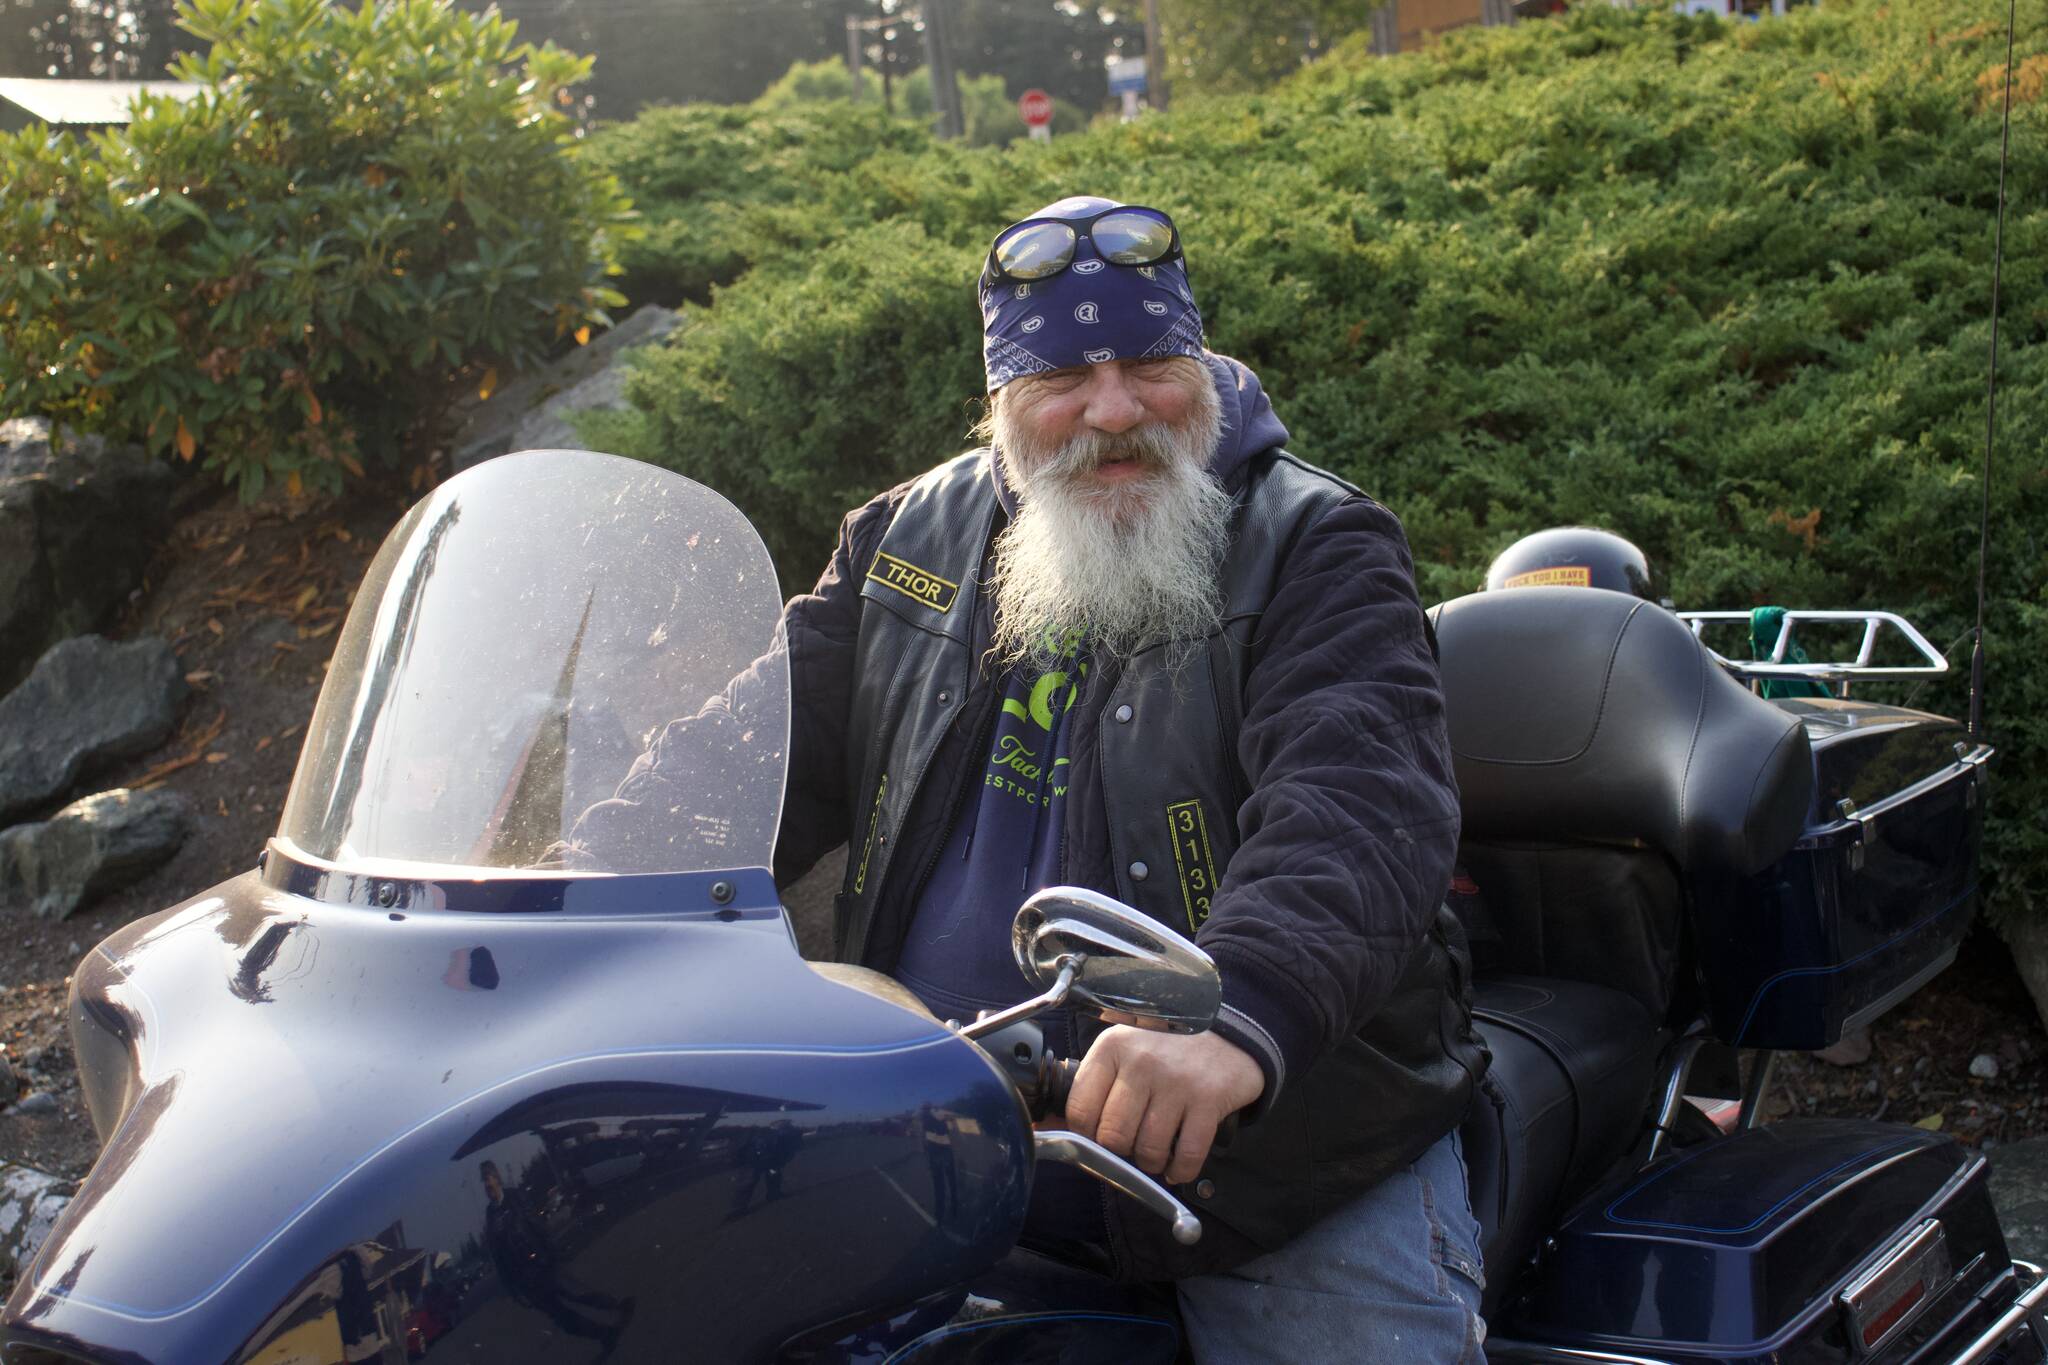 Photo by Rachel Rosen/Whidbey News-Times
Thor Westeralnd of the Island County ‘Chauns came up with the idea to raffle off a motorcycle every year for charity. This year, the proceeds went to the both the Oak Harbor and Anacortes Boys and Girls Clubs.